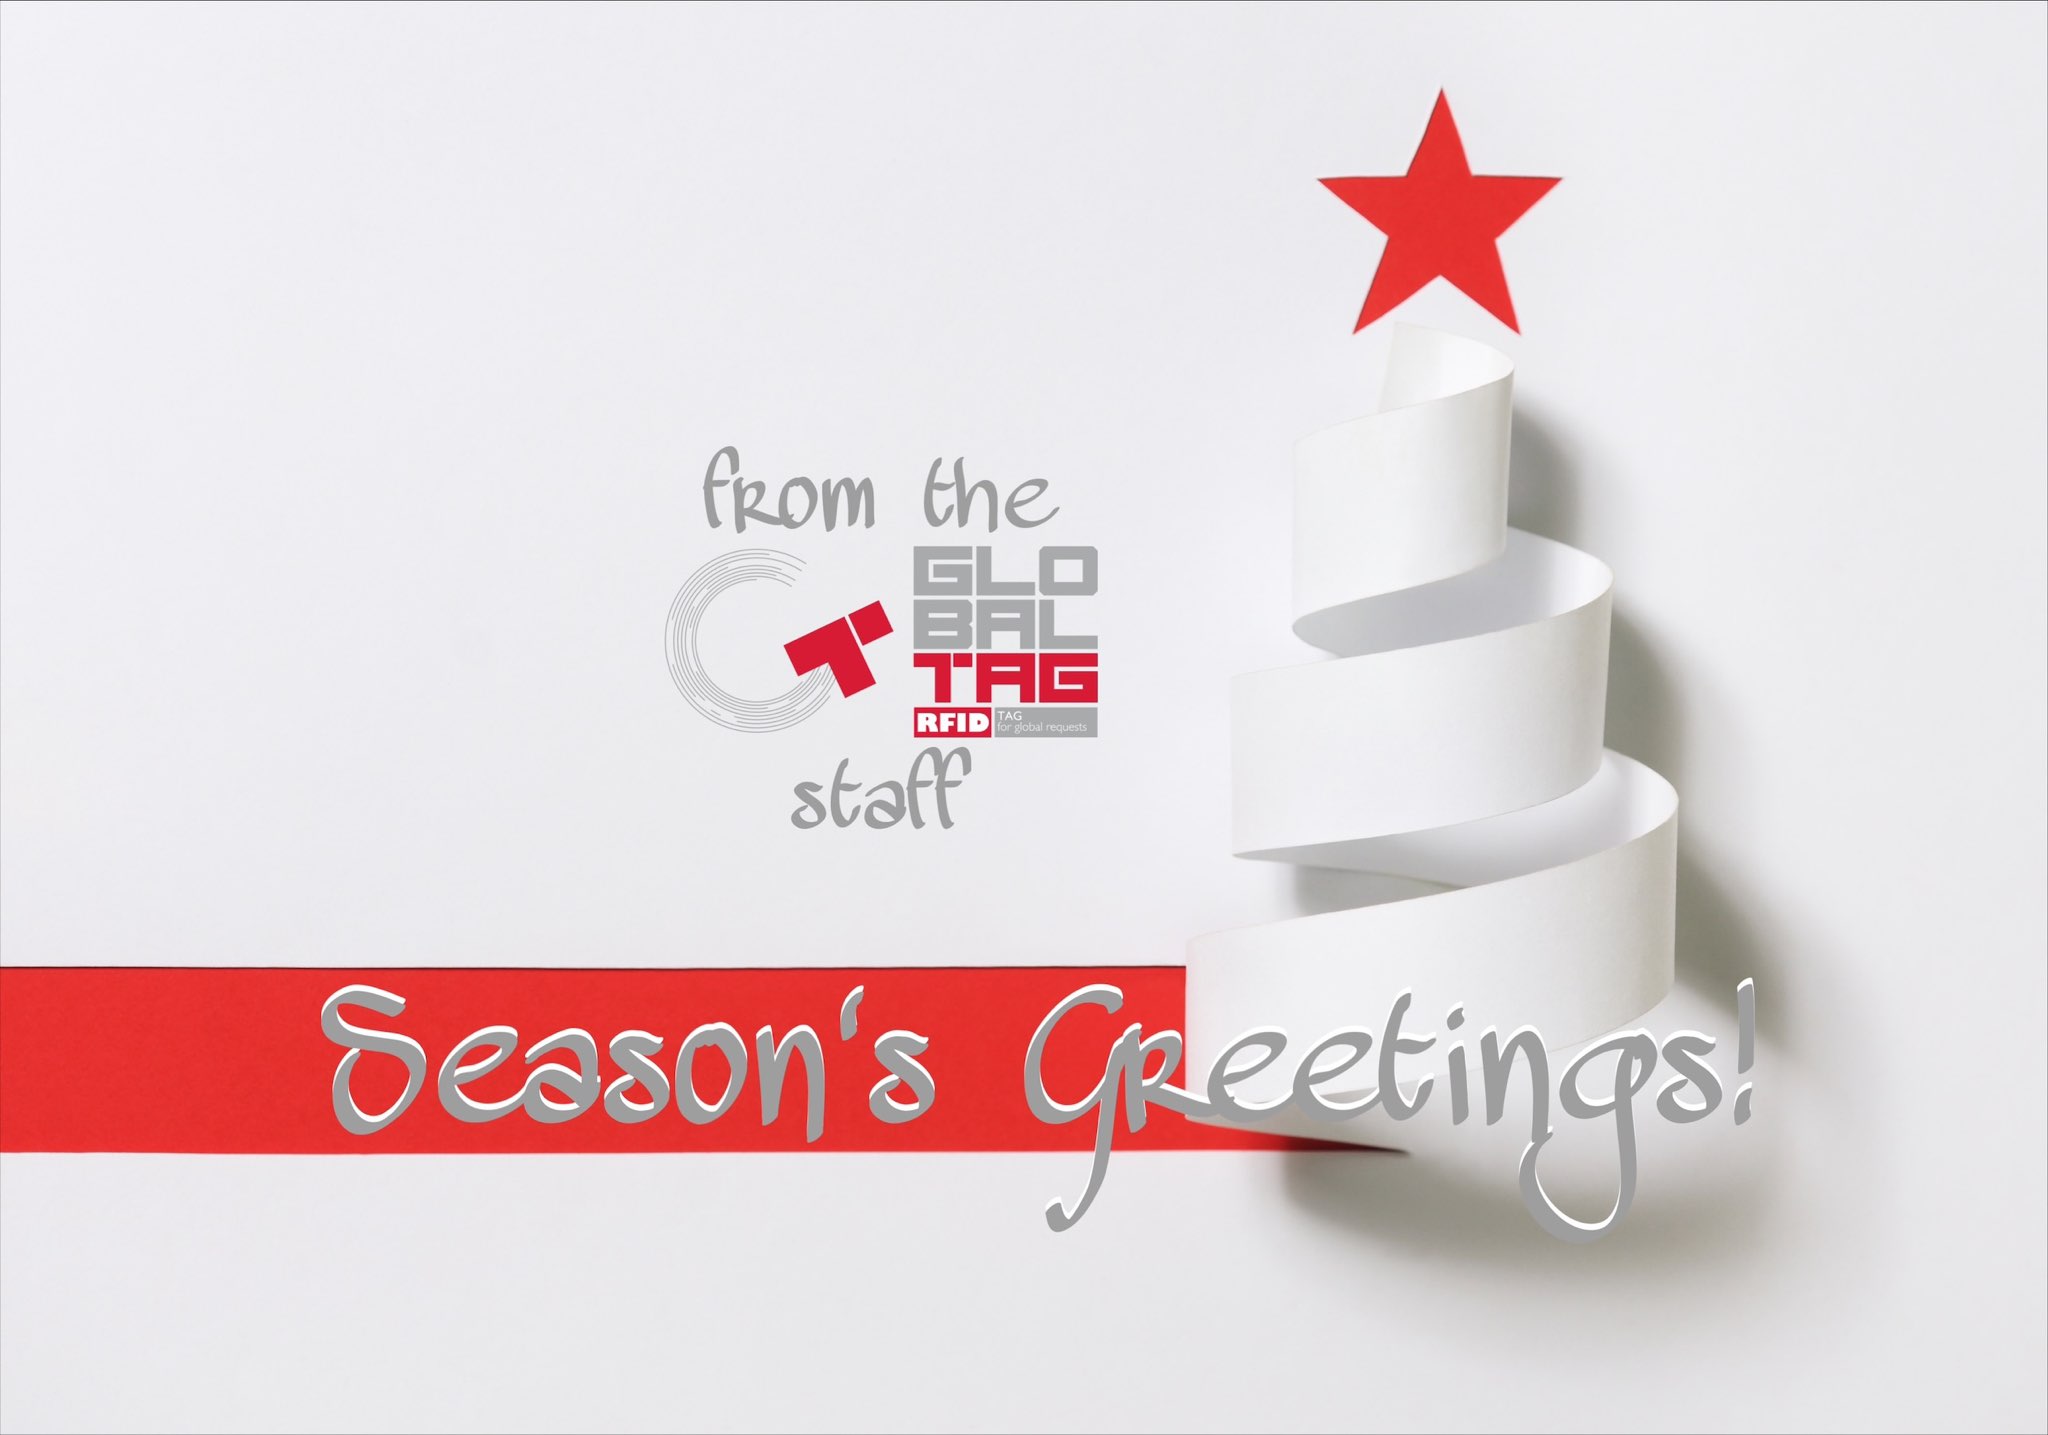 Season’s Greetings from all our Staff!